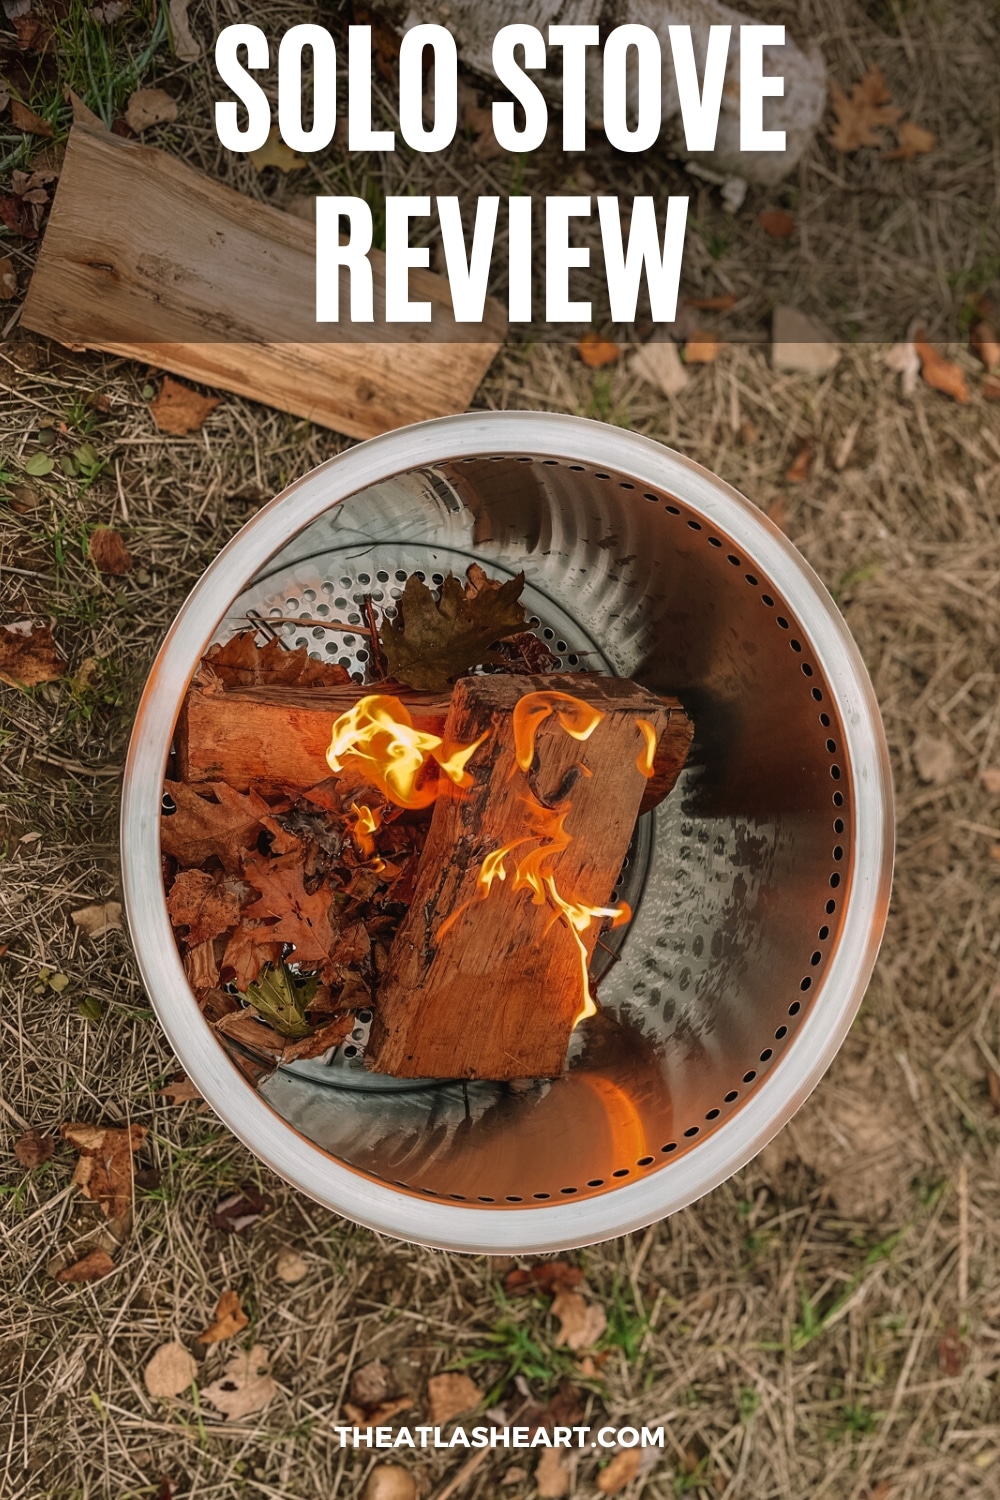 My Honest Solo Stove Review: Are Solo Stoves Actually Worth it?